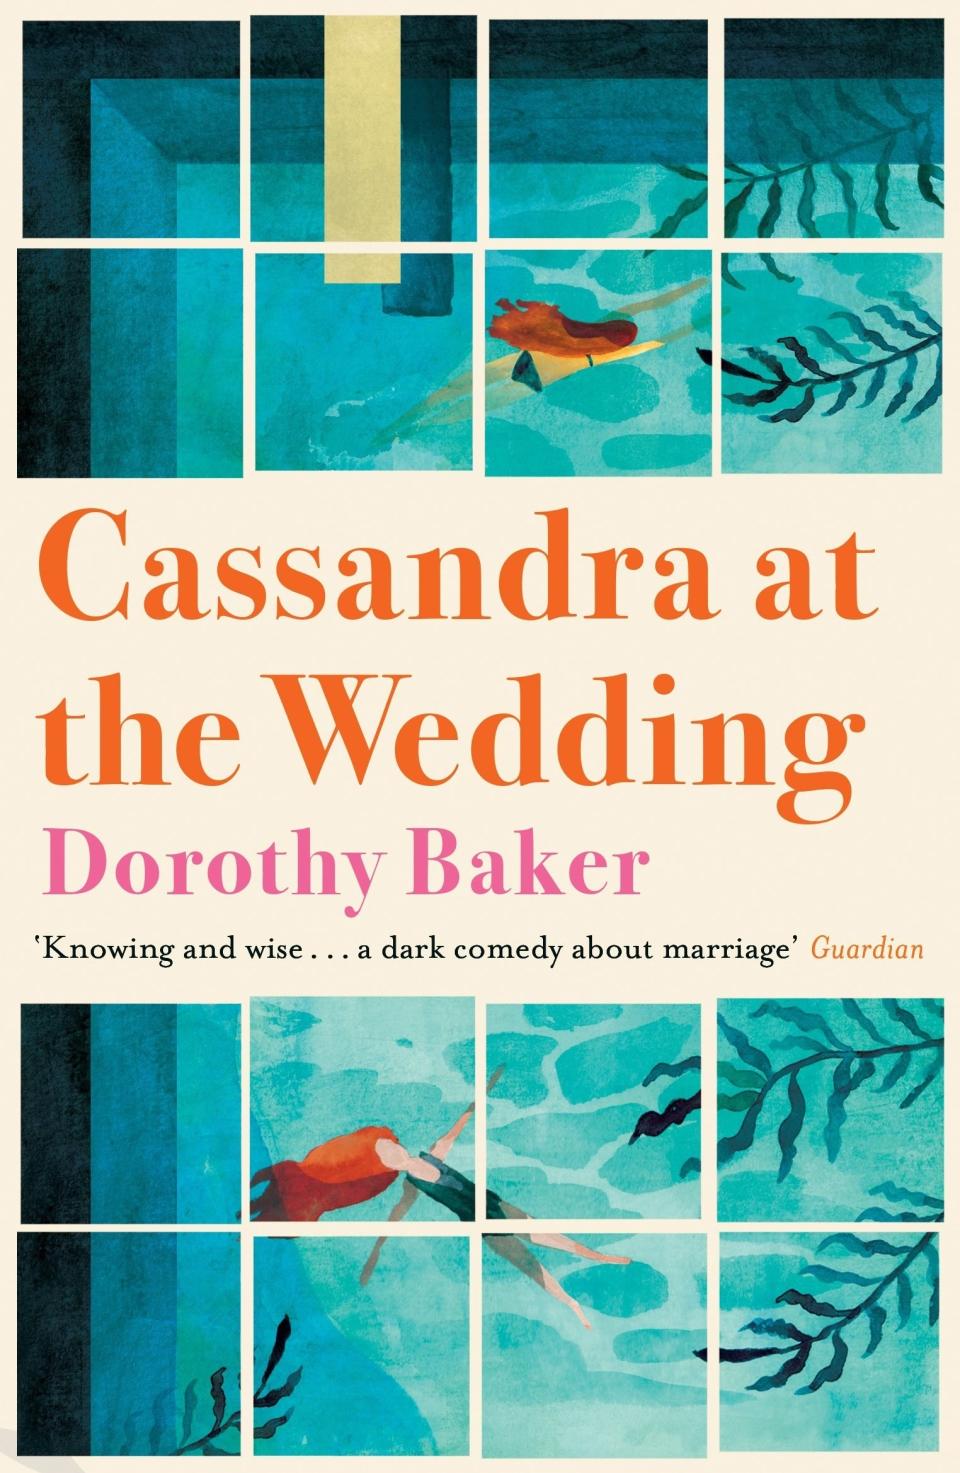 Baker's fiery and hilarious 1962 novel about a wedding gone awry went 